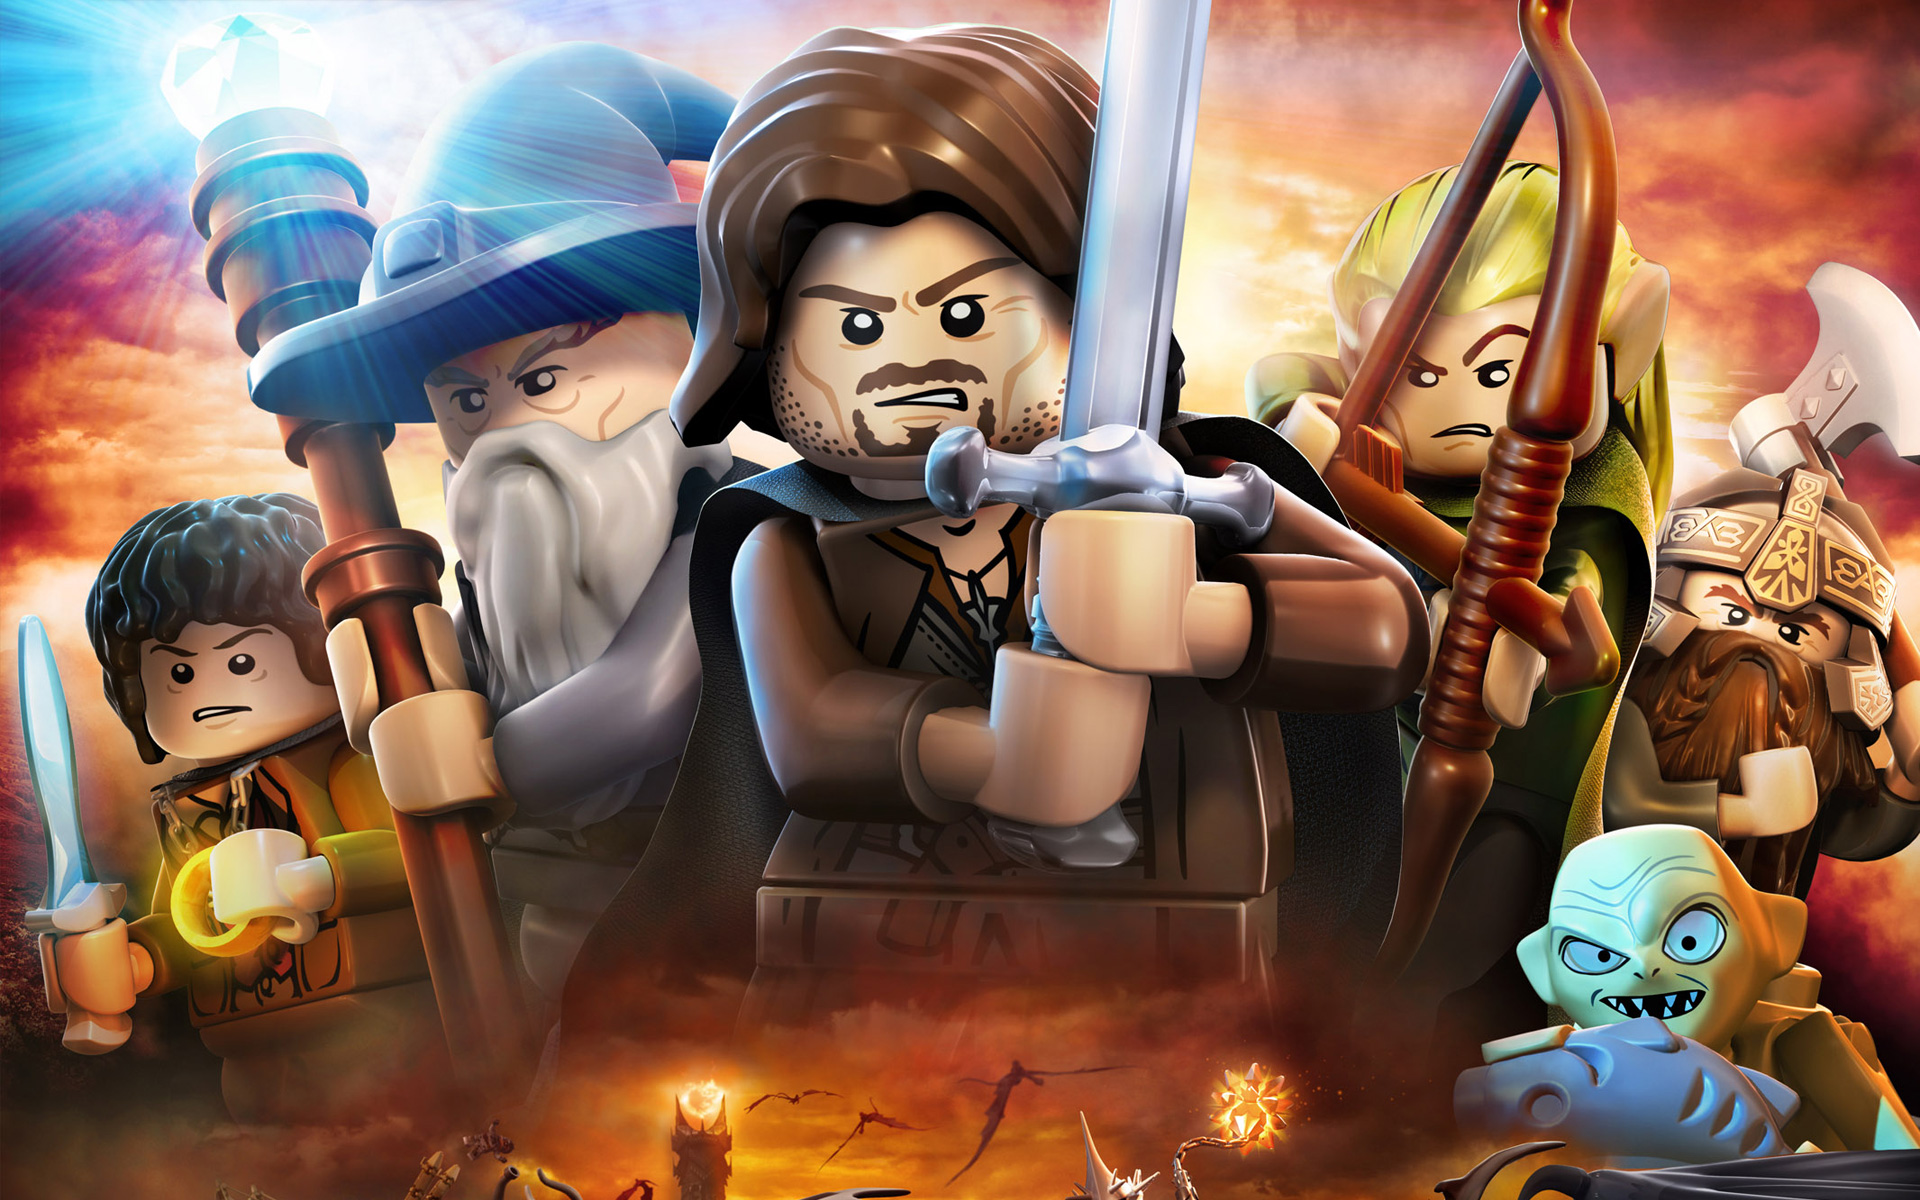 Lego lord of the rings - 10 free HQ online Puzzle Games on ...